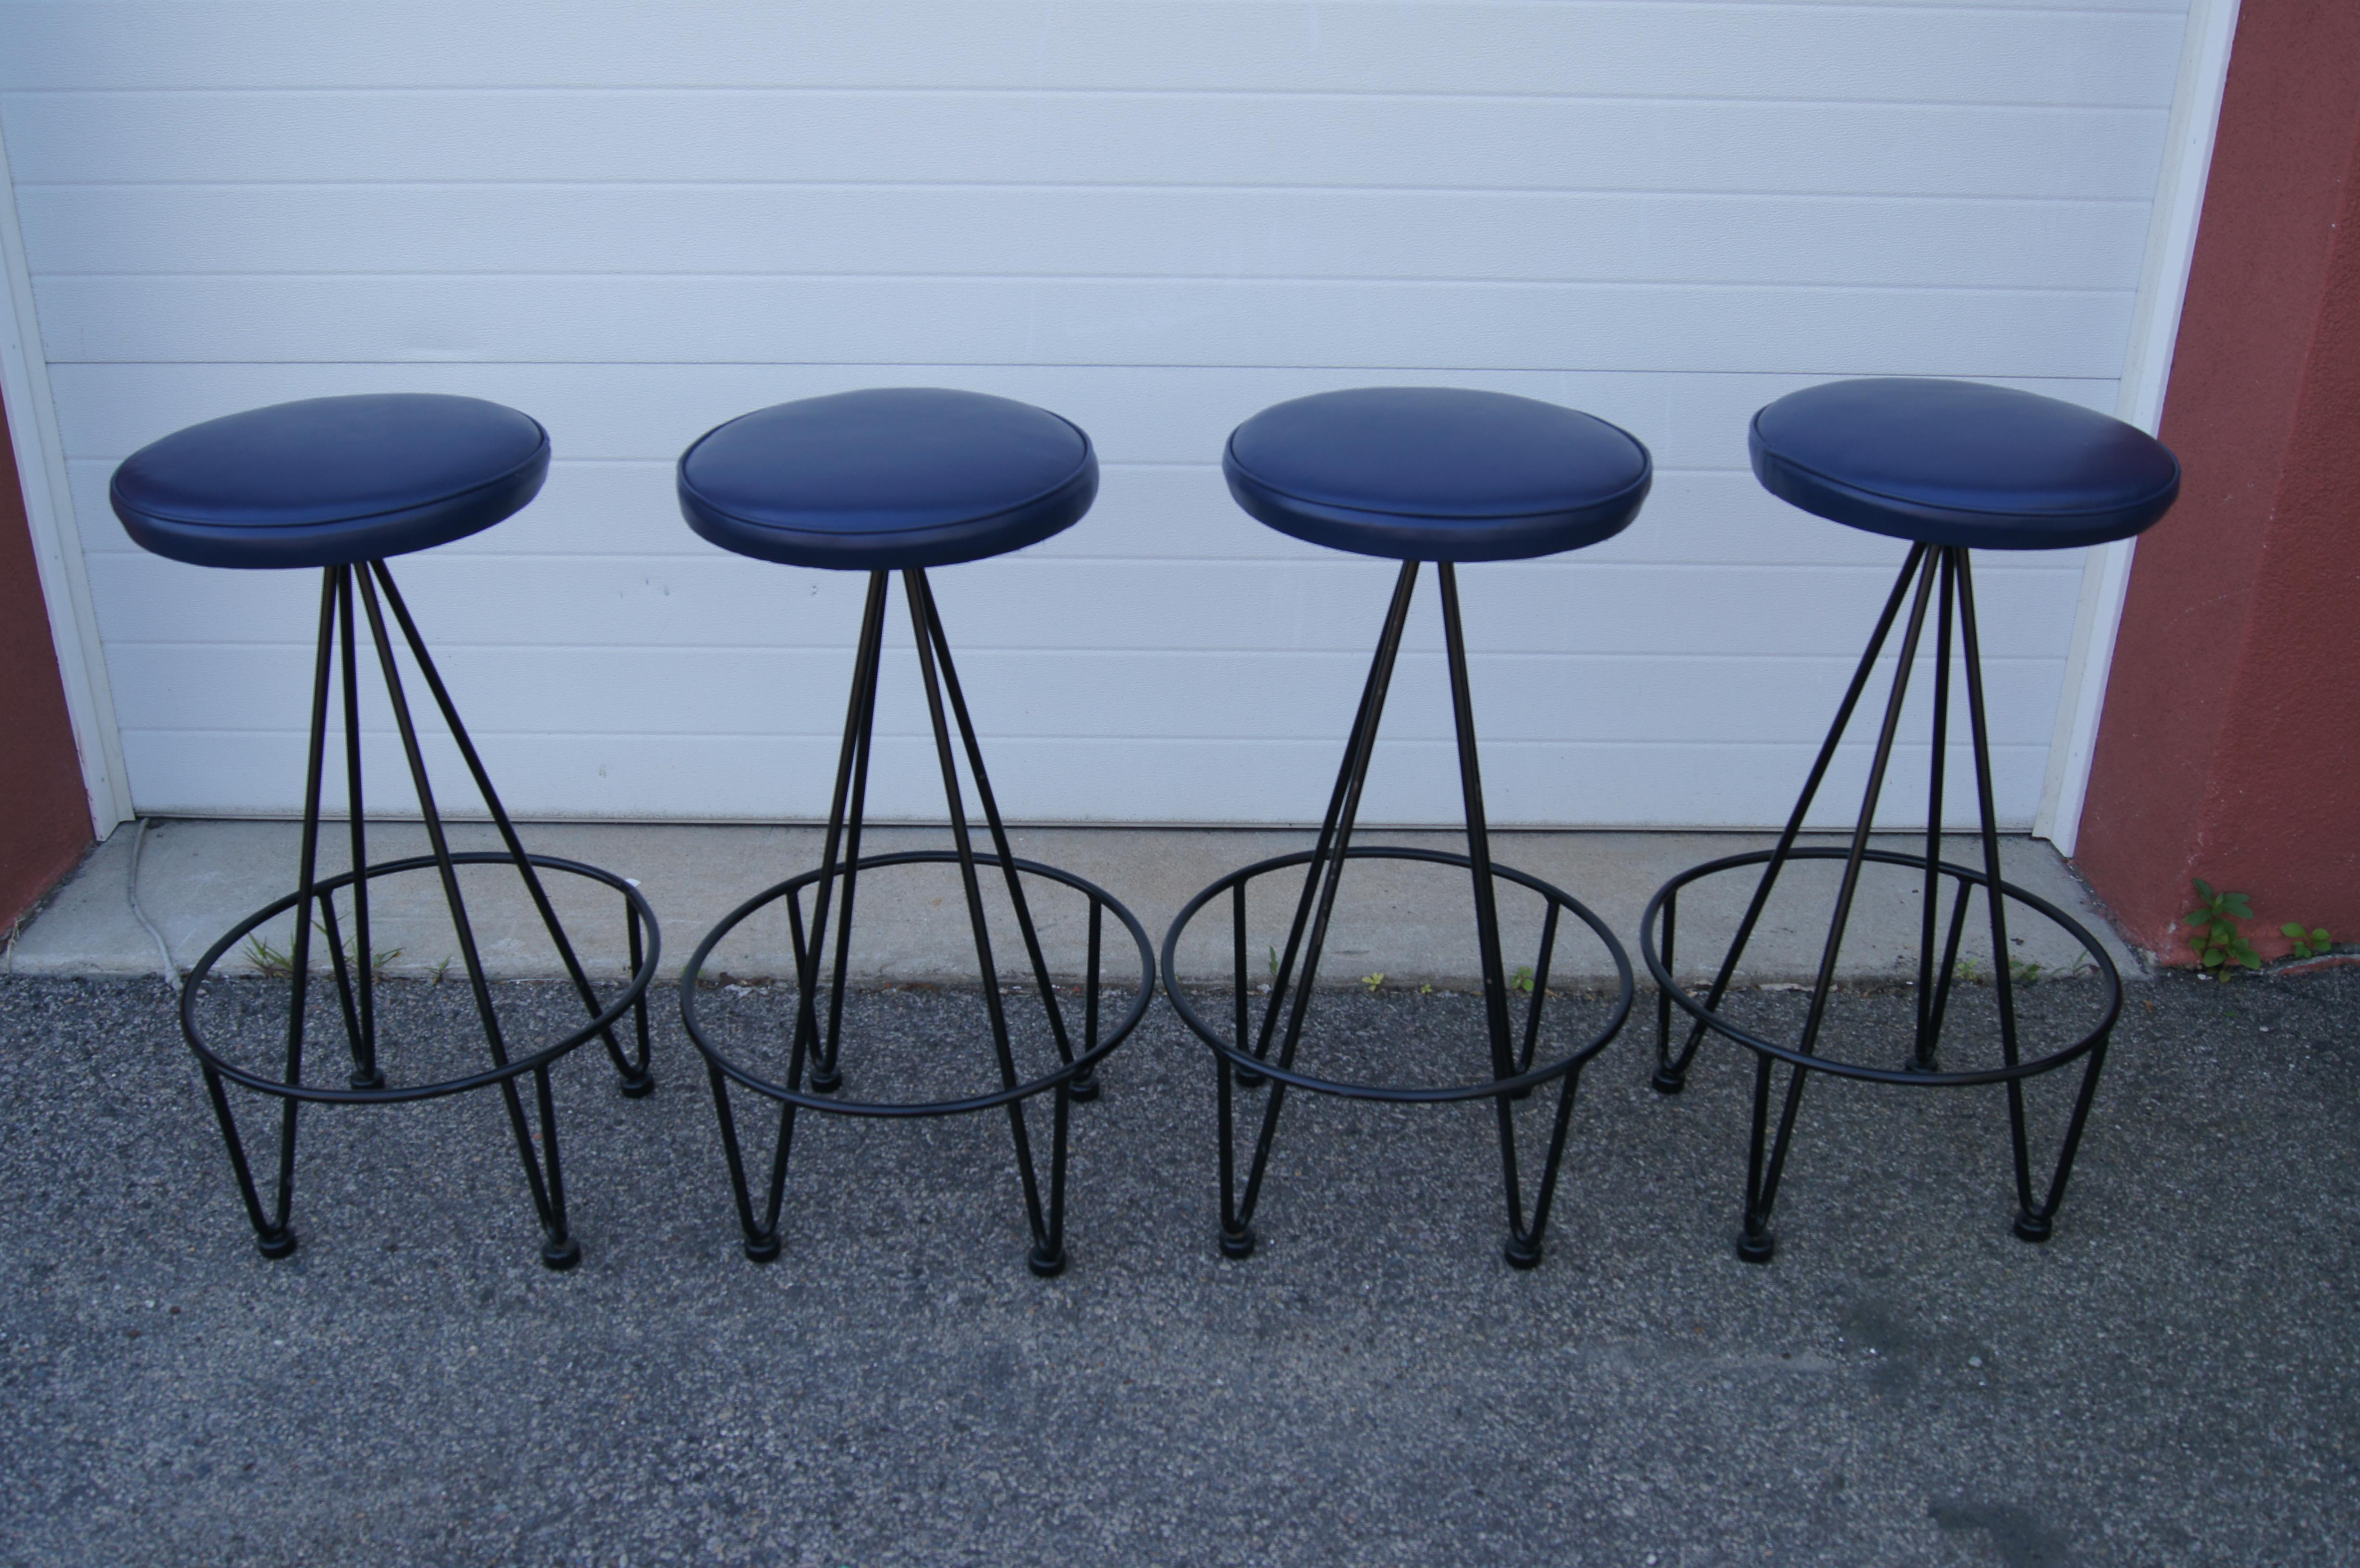 Philadelphia-based artist and industrial designer Frederic Weinberg created these classic mid-century modern bar stools. This set of four features wrought-iron frames with hairpin legs and comfortable round seats, here in deep blue leather.